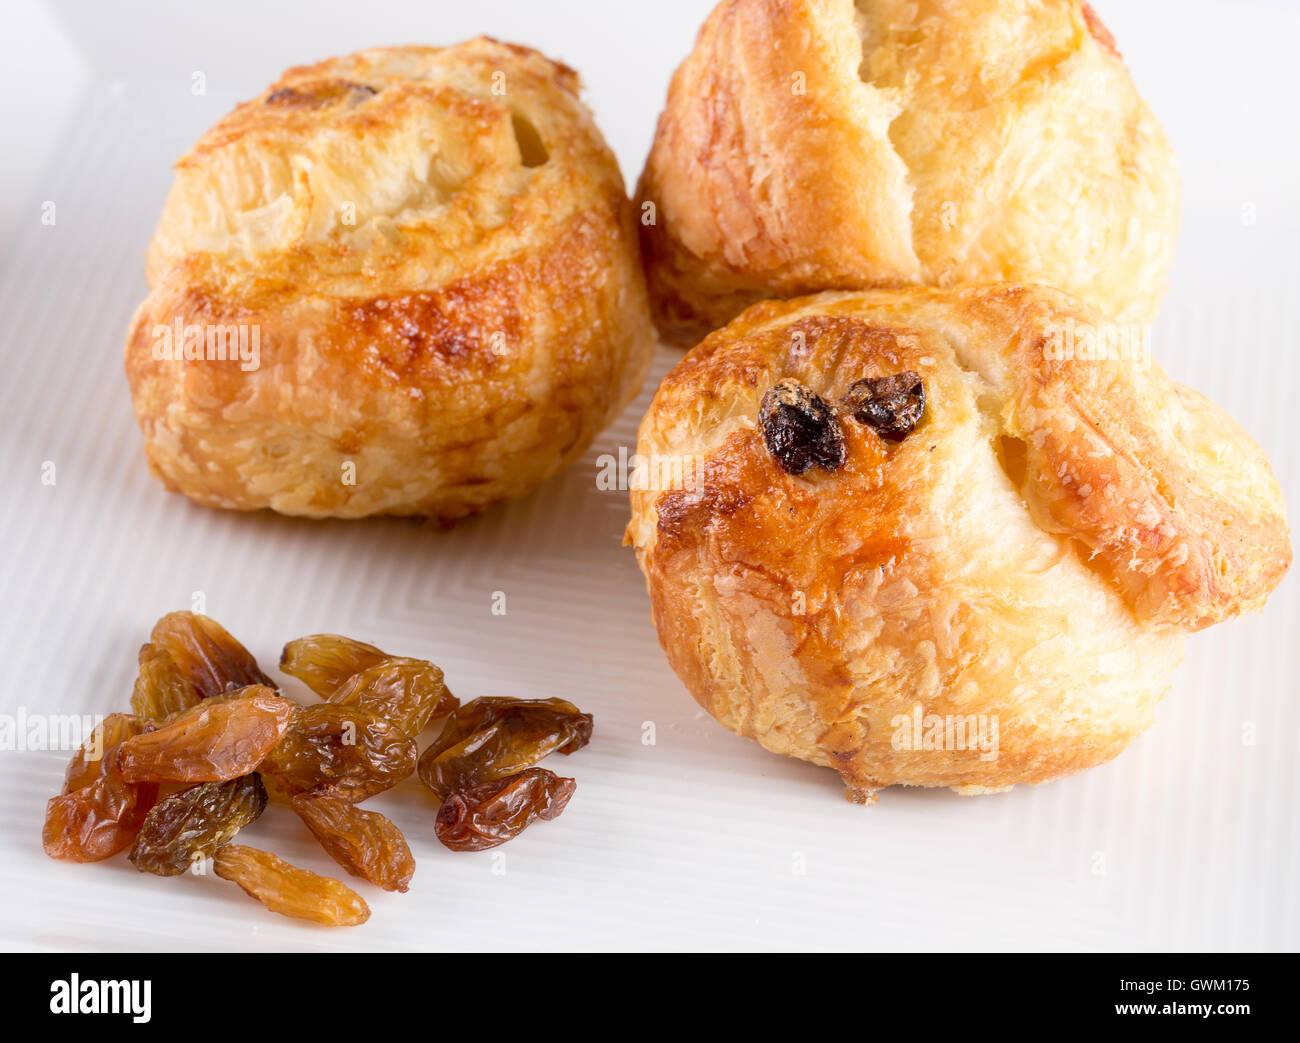 puffs with raisins on white plate. Stock Photo